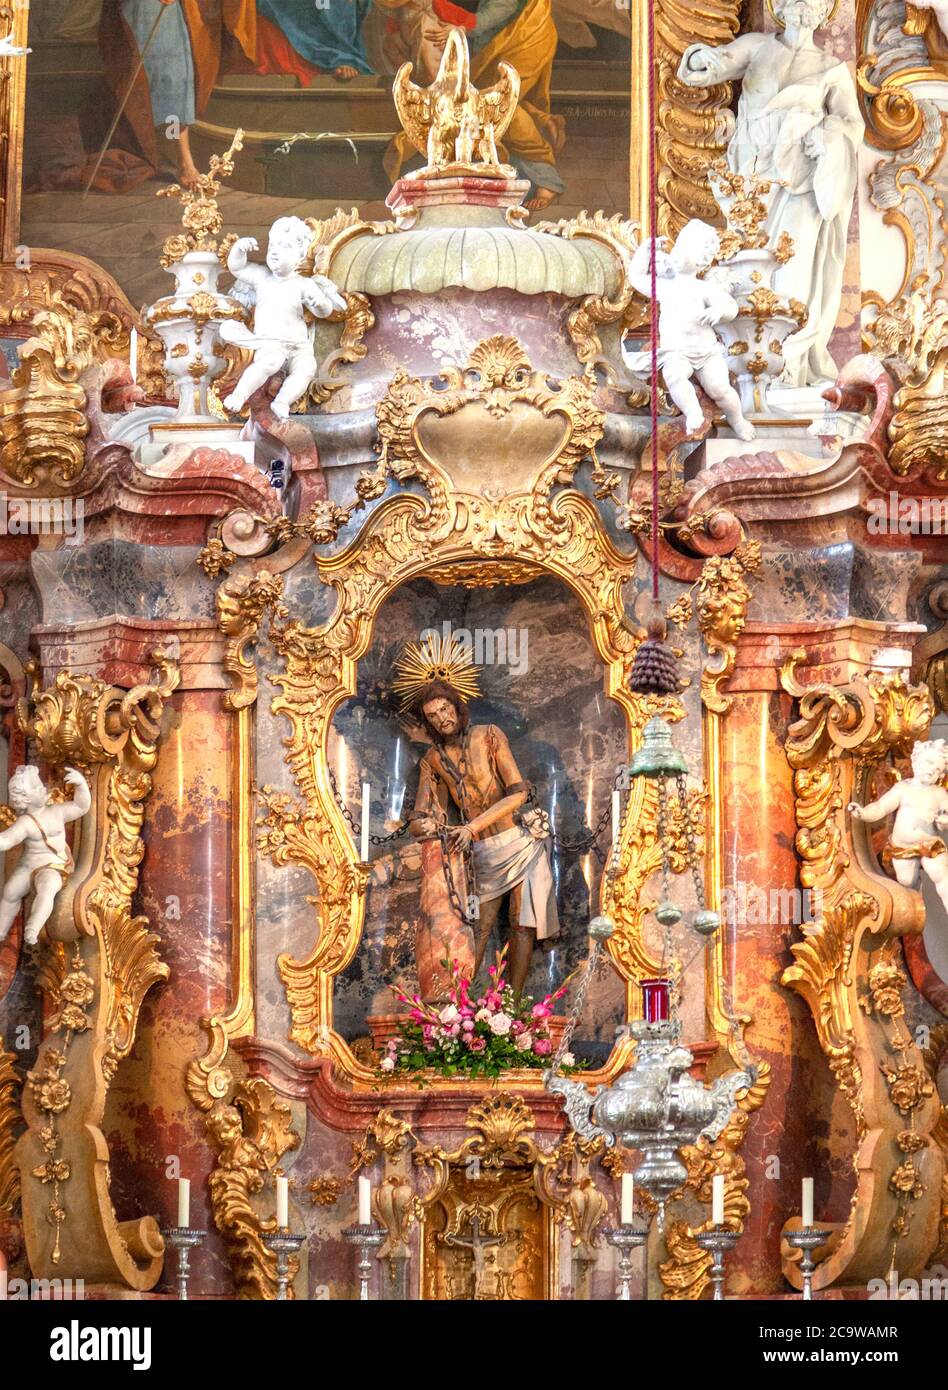 Altar detail, centered on the 'Weeping Christ,' Wieskirche Pilgrimage Church, Bavaria, Germany. Stock Photo